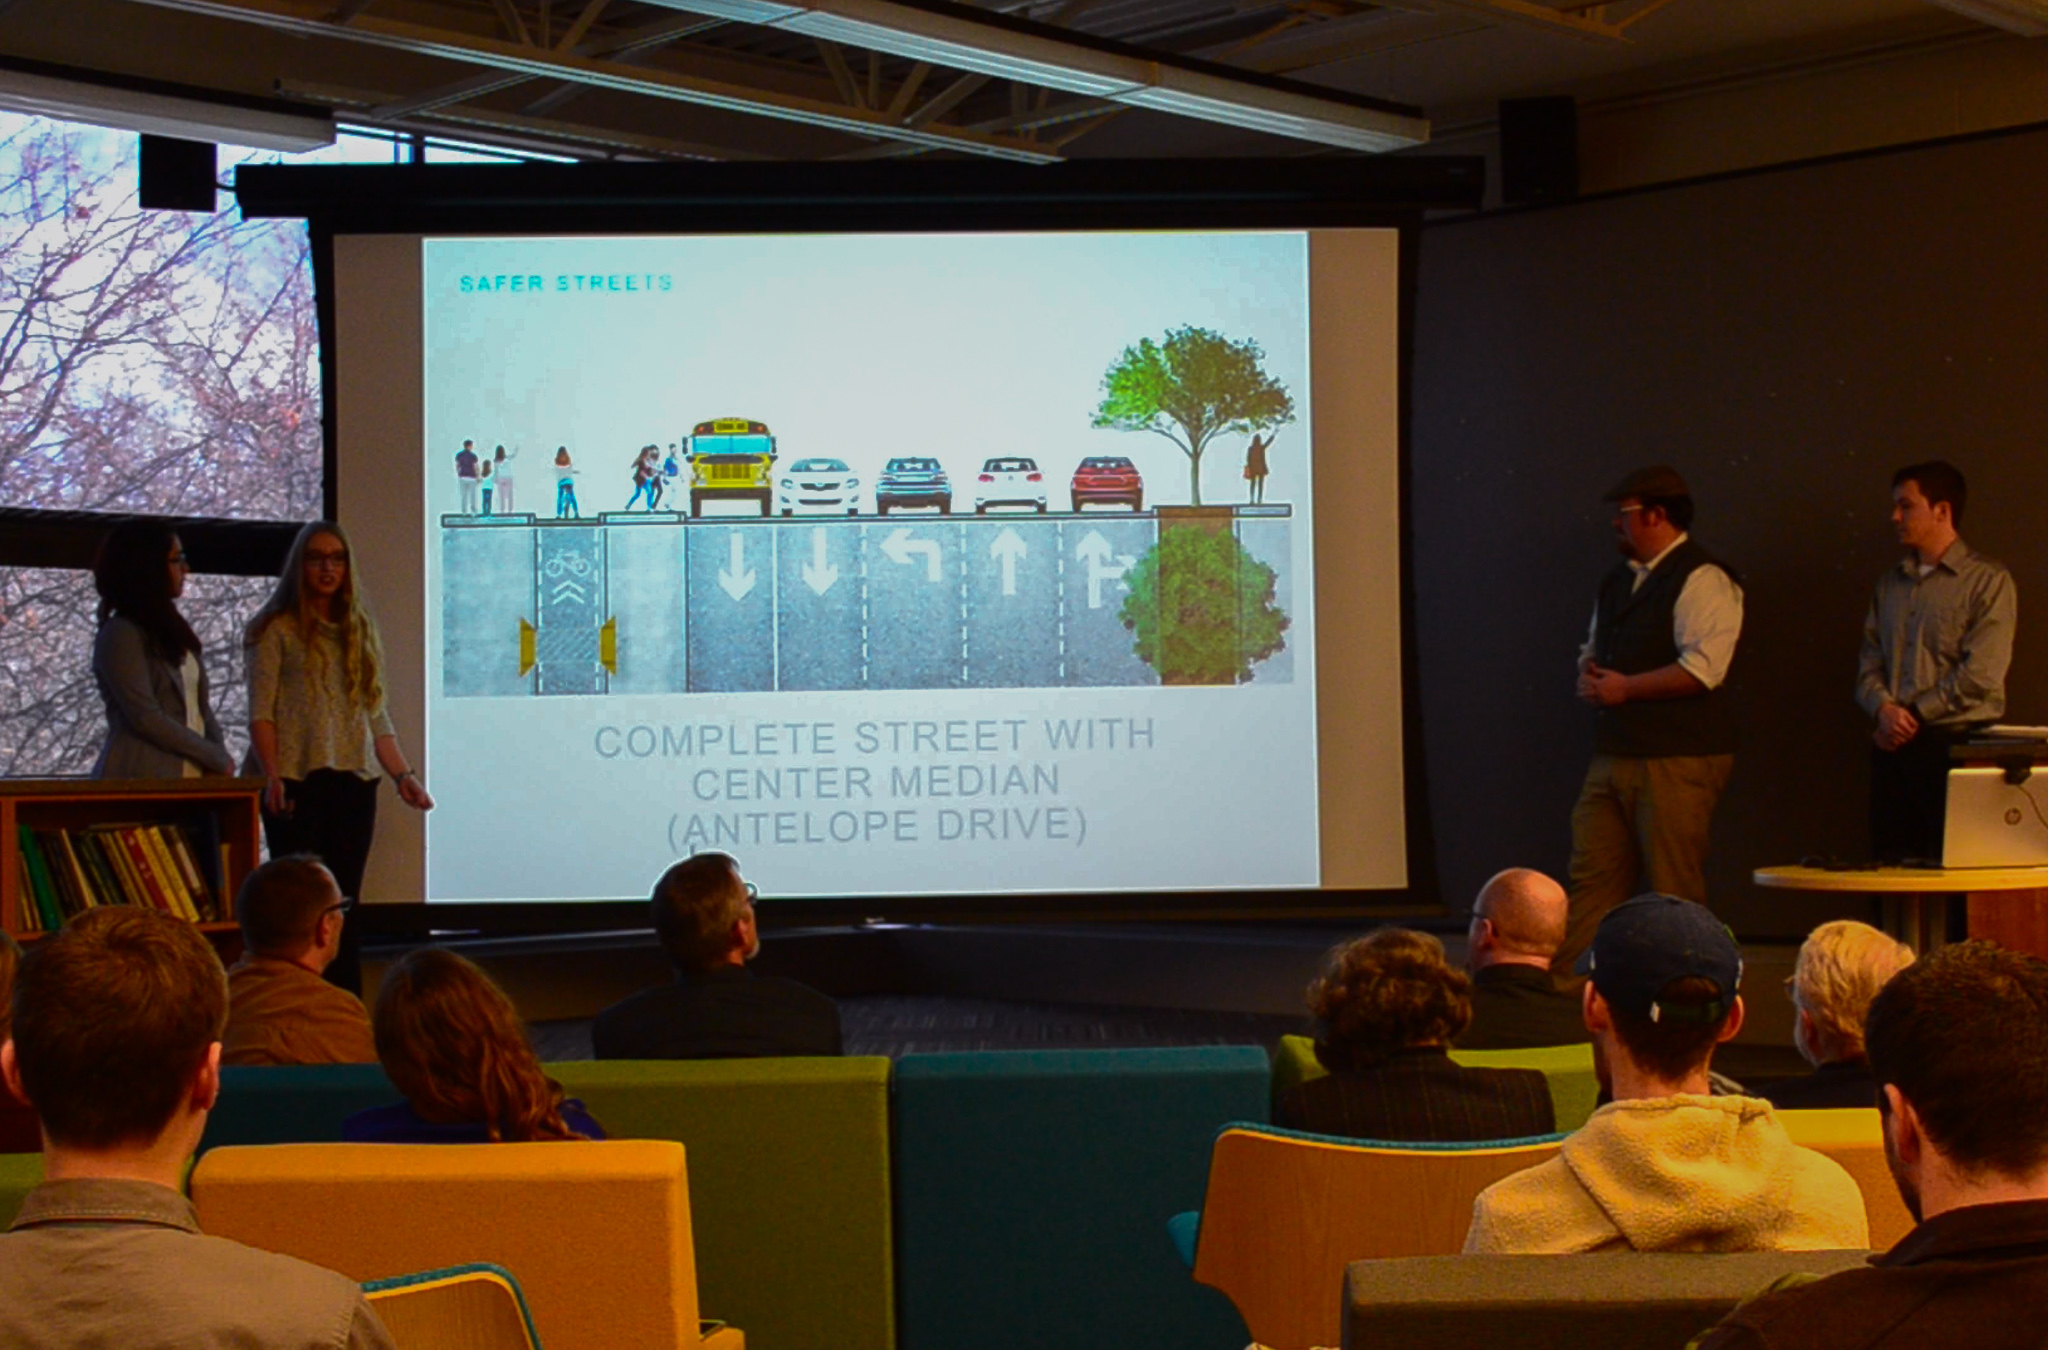 Students present about developing safer streets